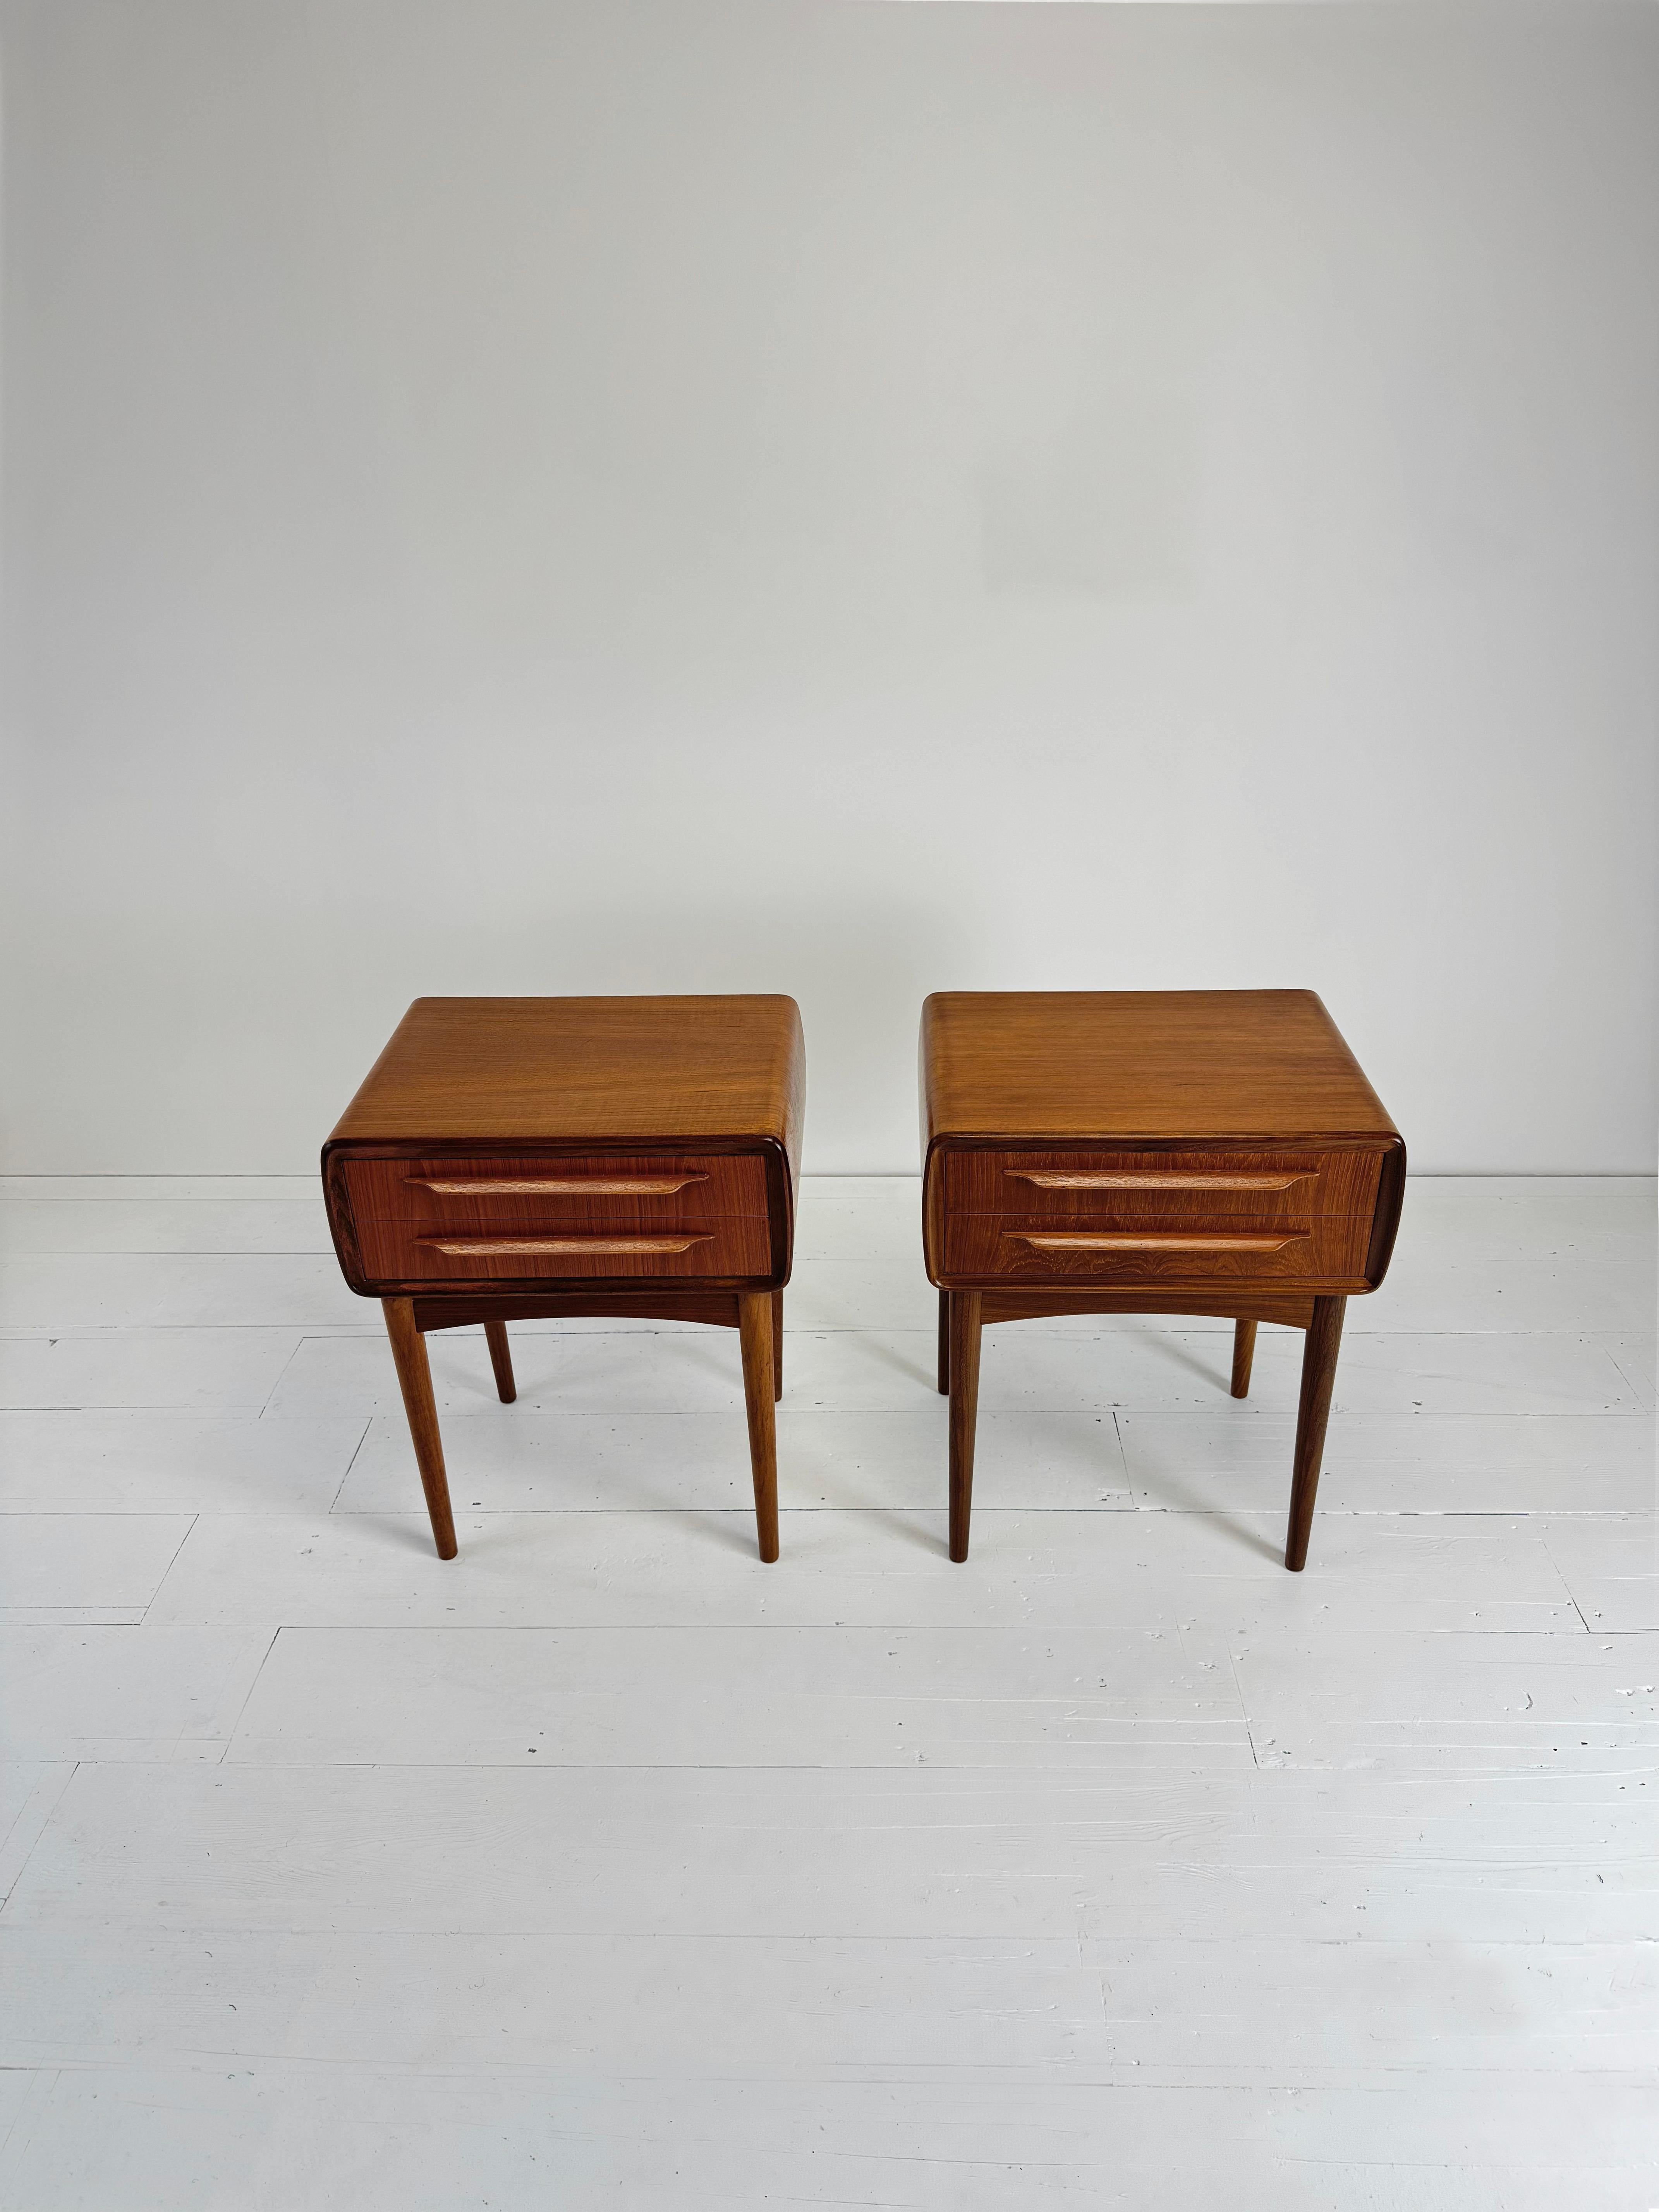 A Pair of Teak Night Stands by Johaness Andersen c.1960's In Good Condition For Sale In London, GB